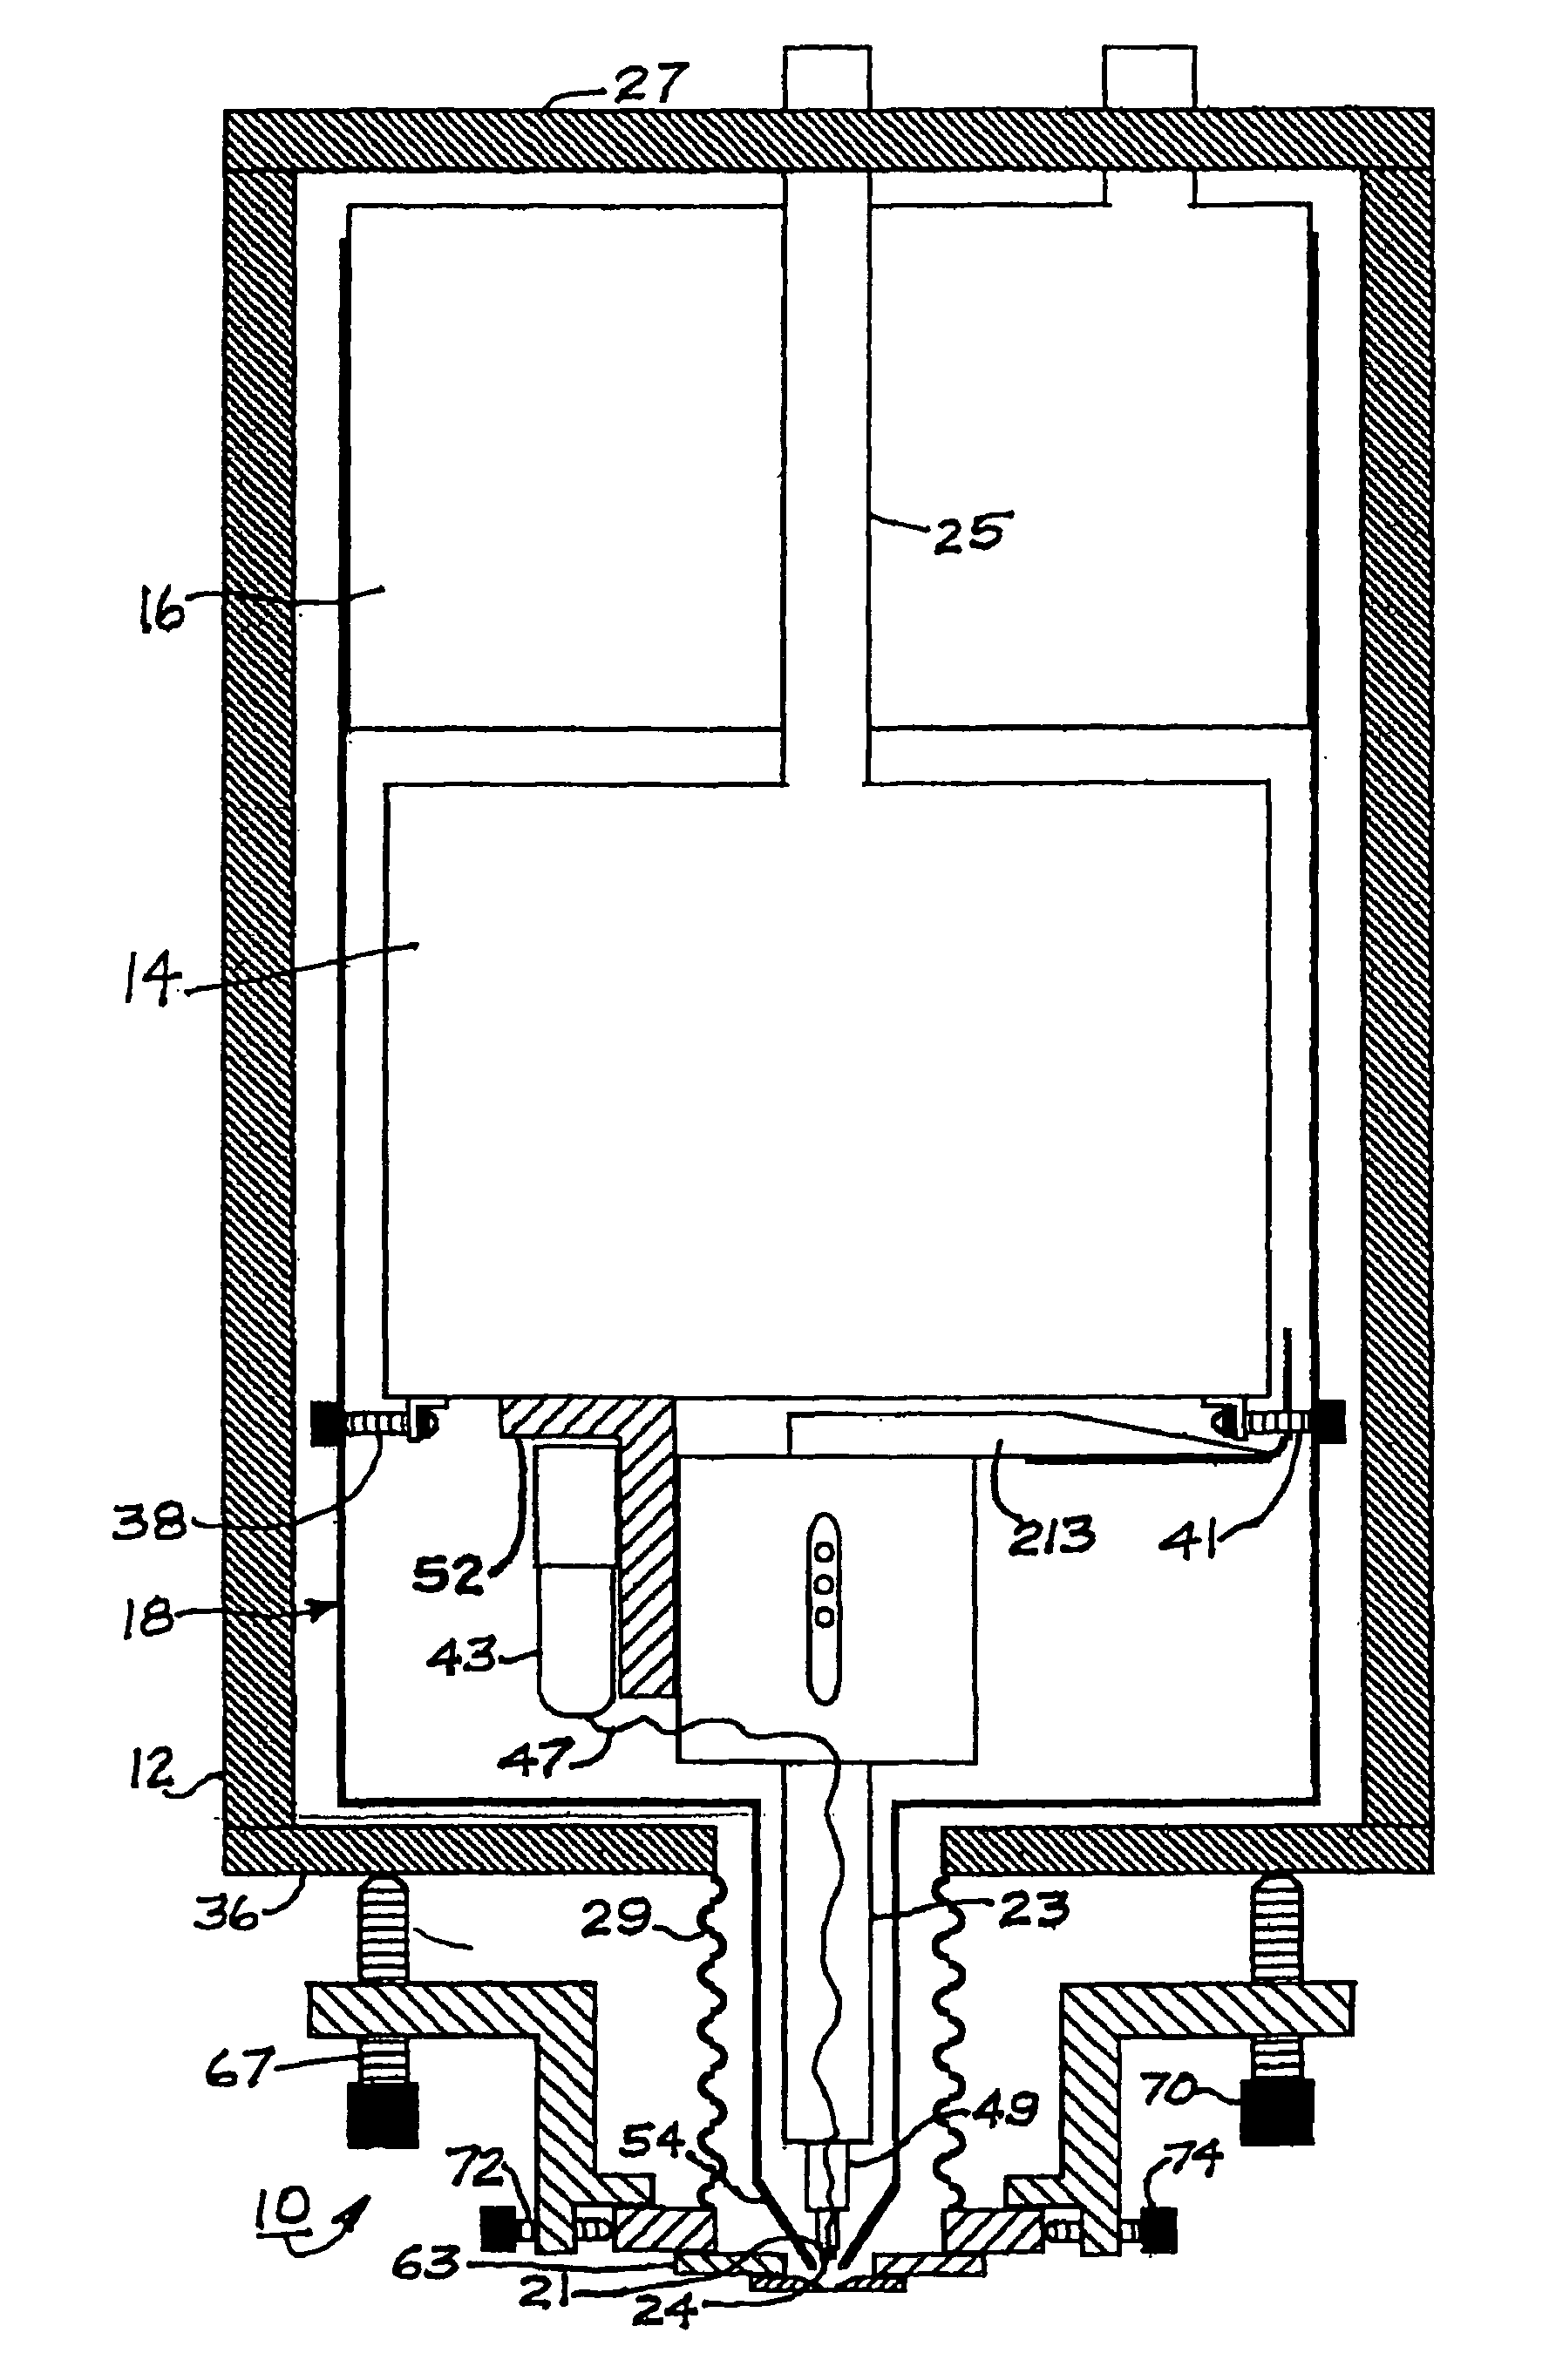 Superconducting quantum interference apparatus and method for high resolution imaging of samples